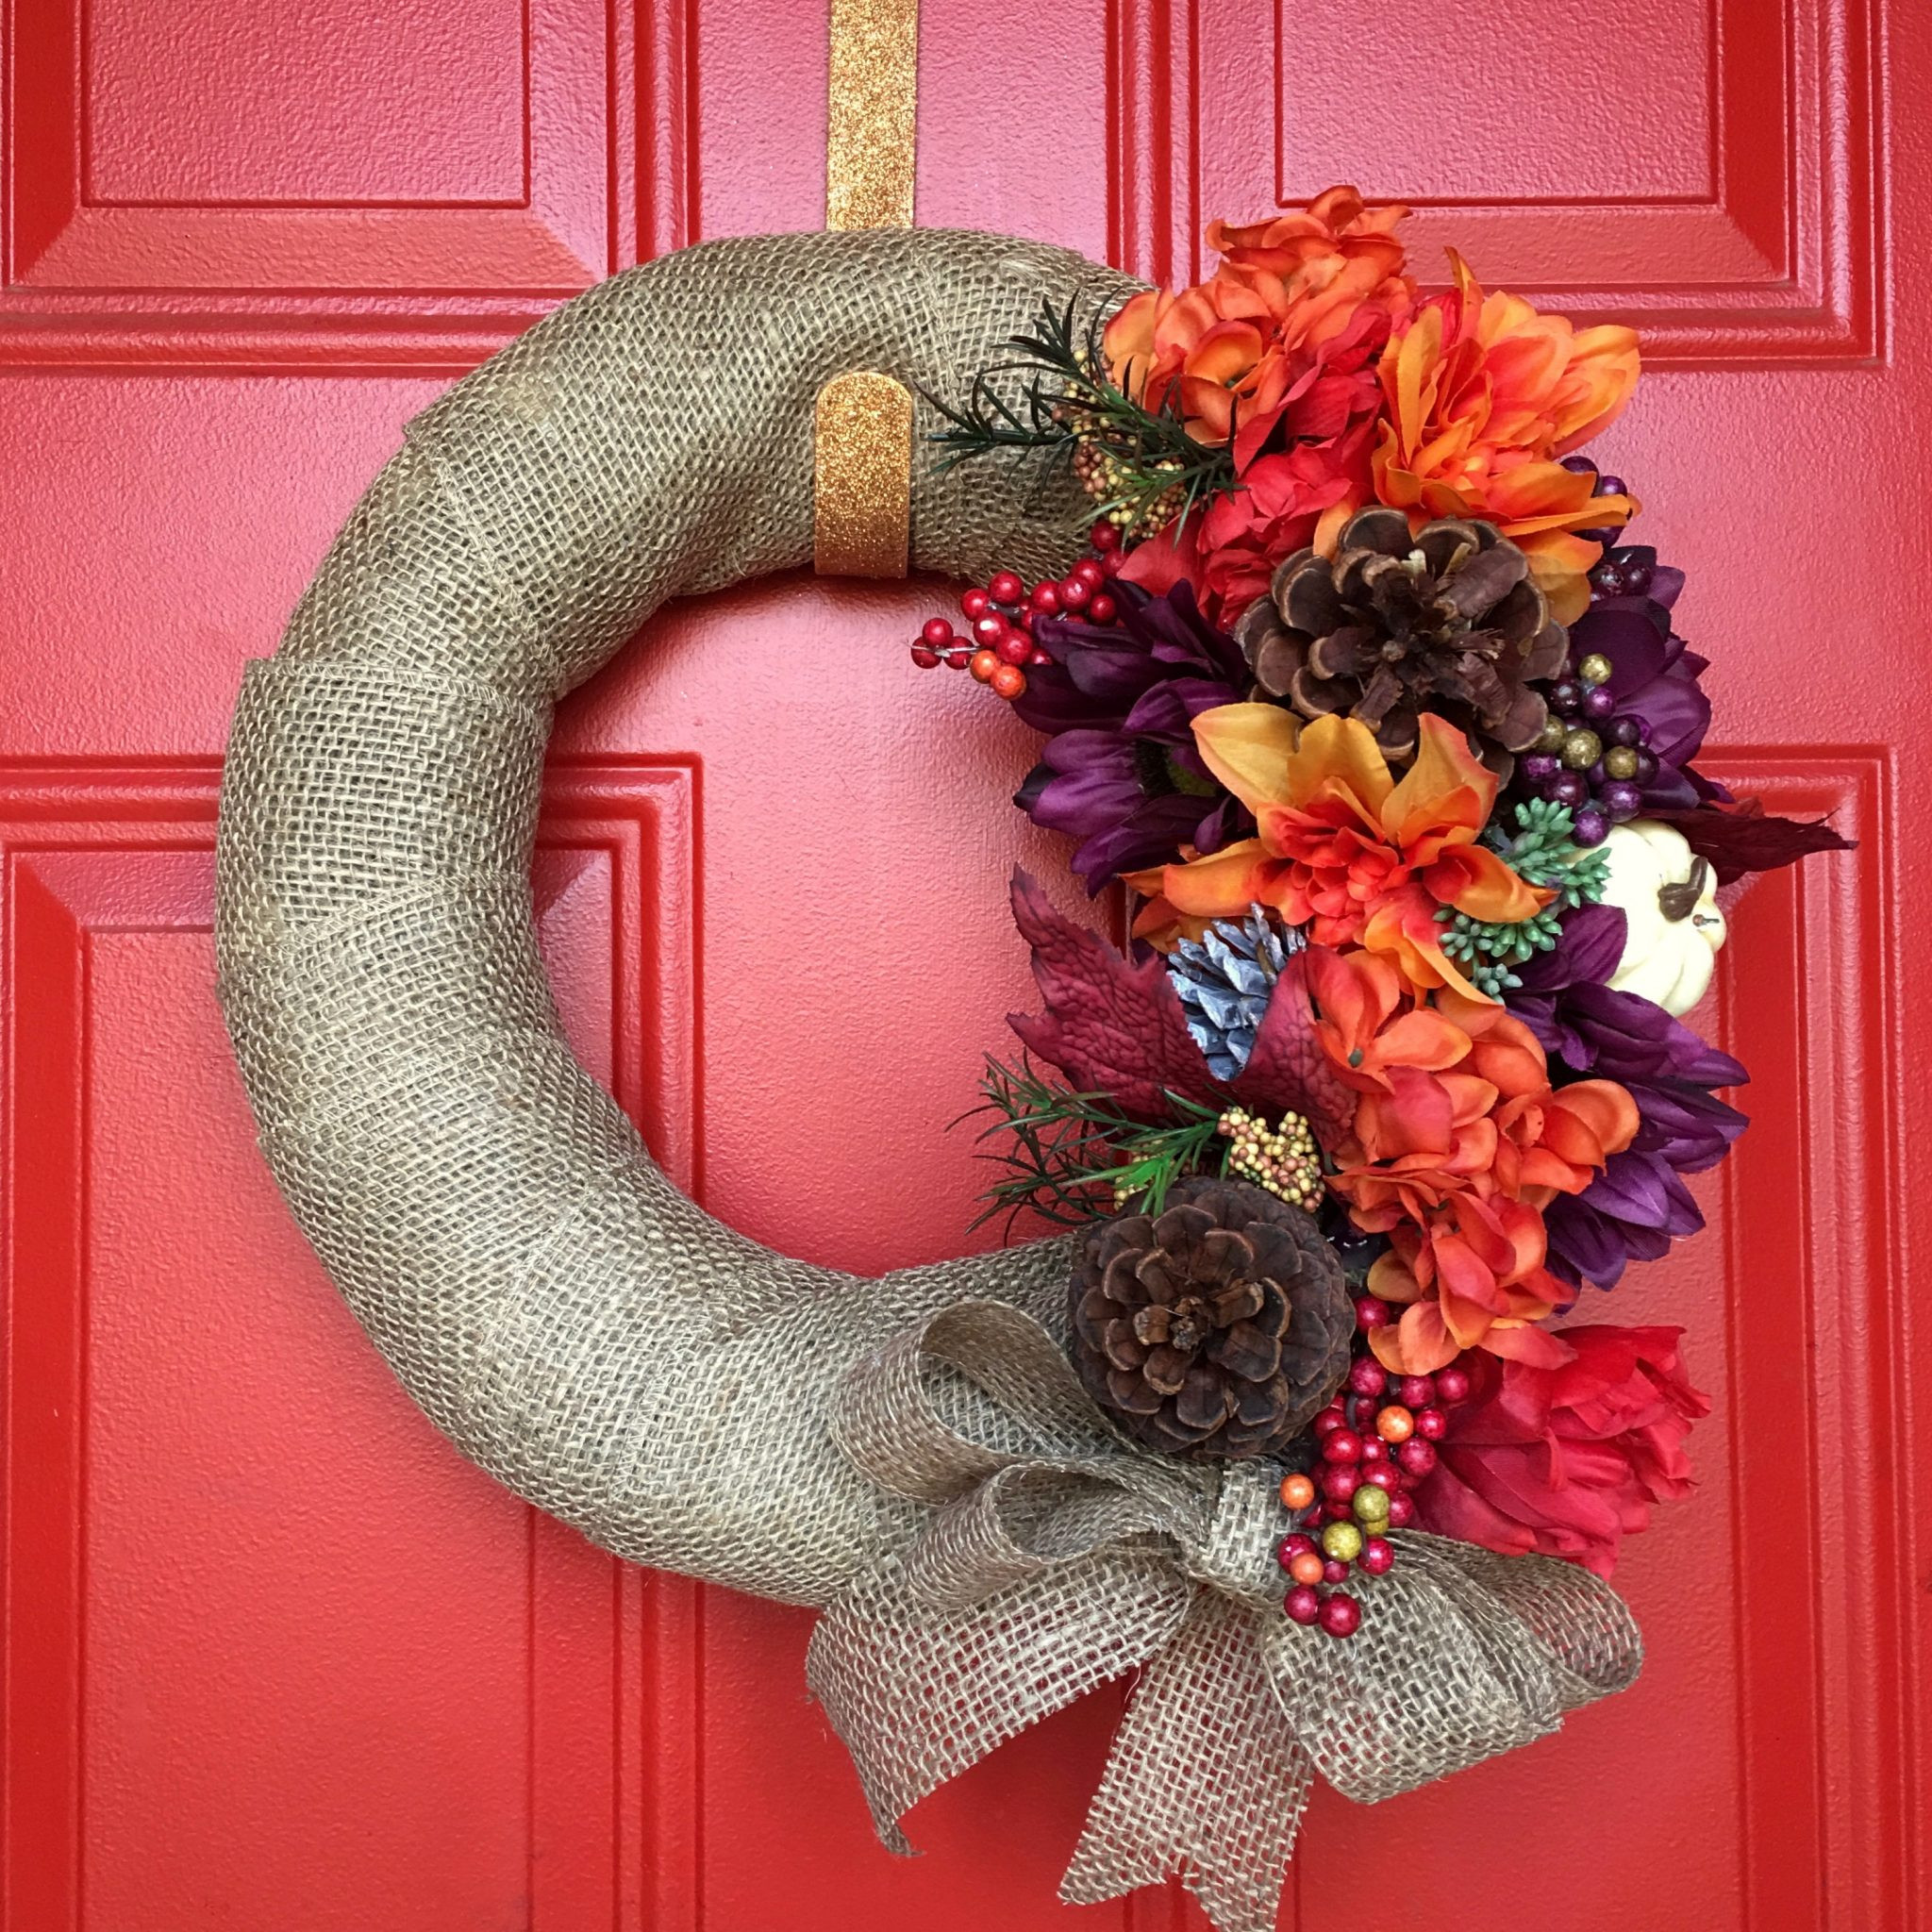 September Crafts For Adults
 Adults & Crafts Review Autumn Wreath September 2018